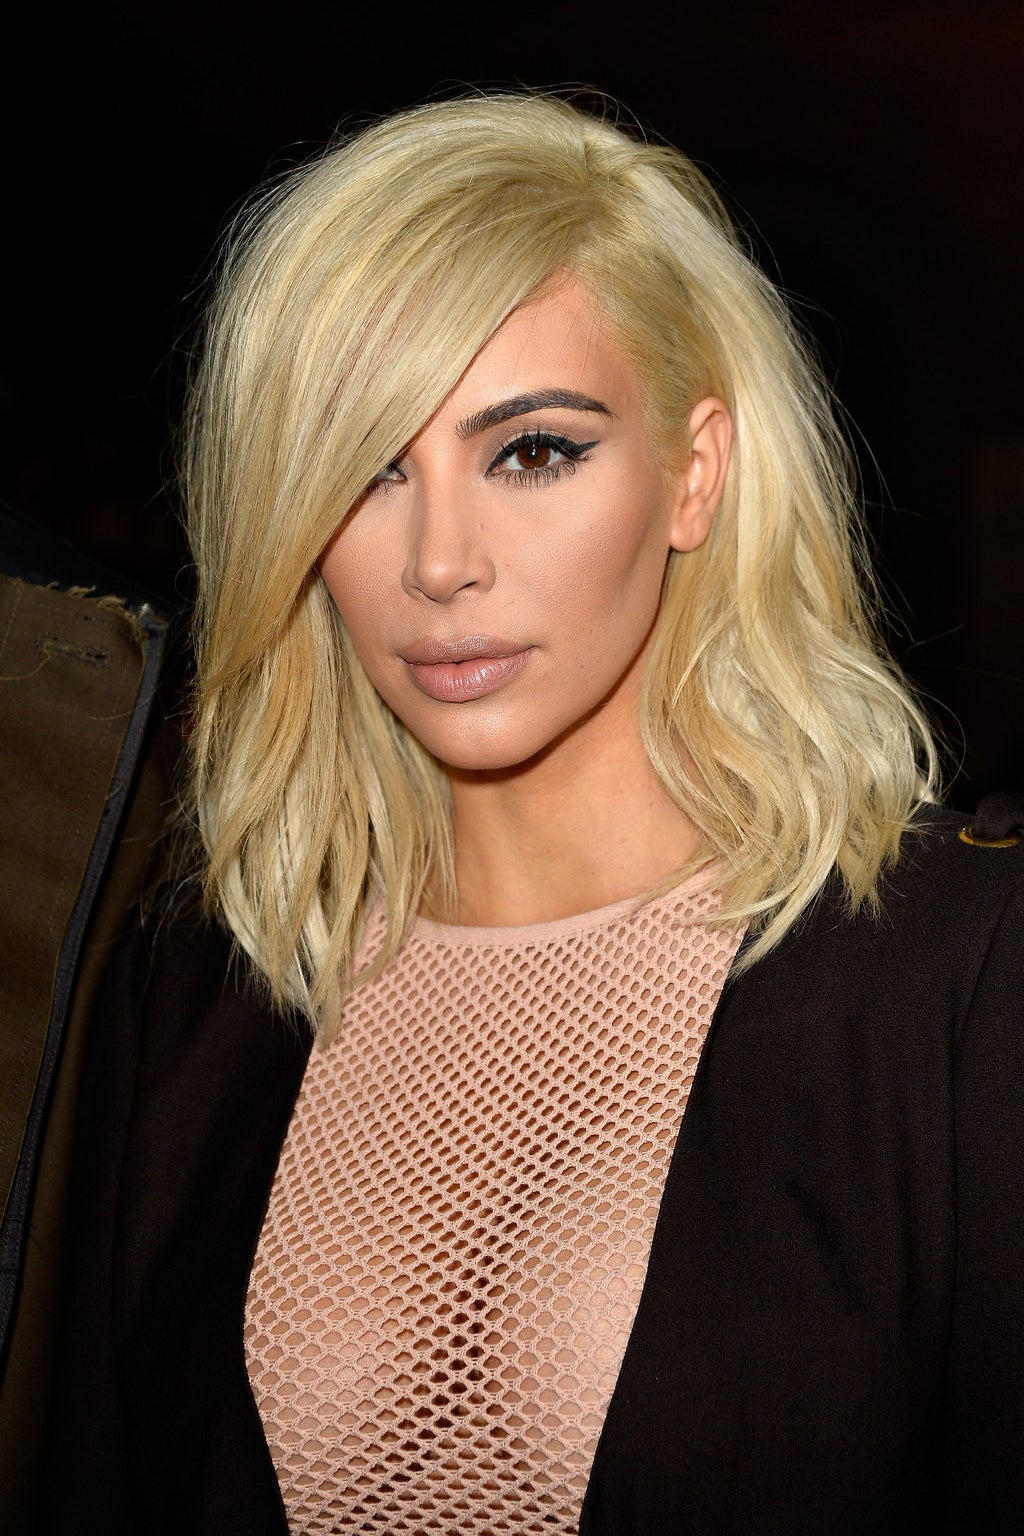 Here Is Everything You Need To Know About Going Platinum Blonde